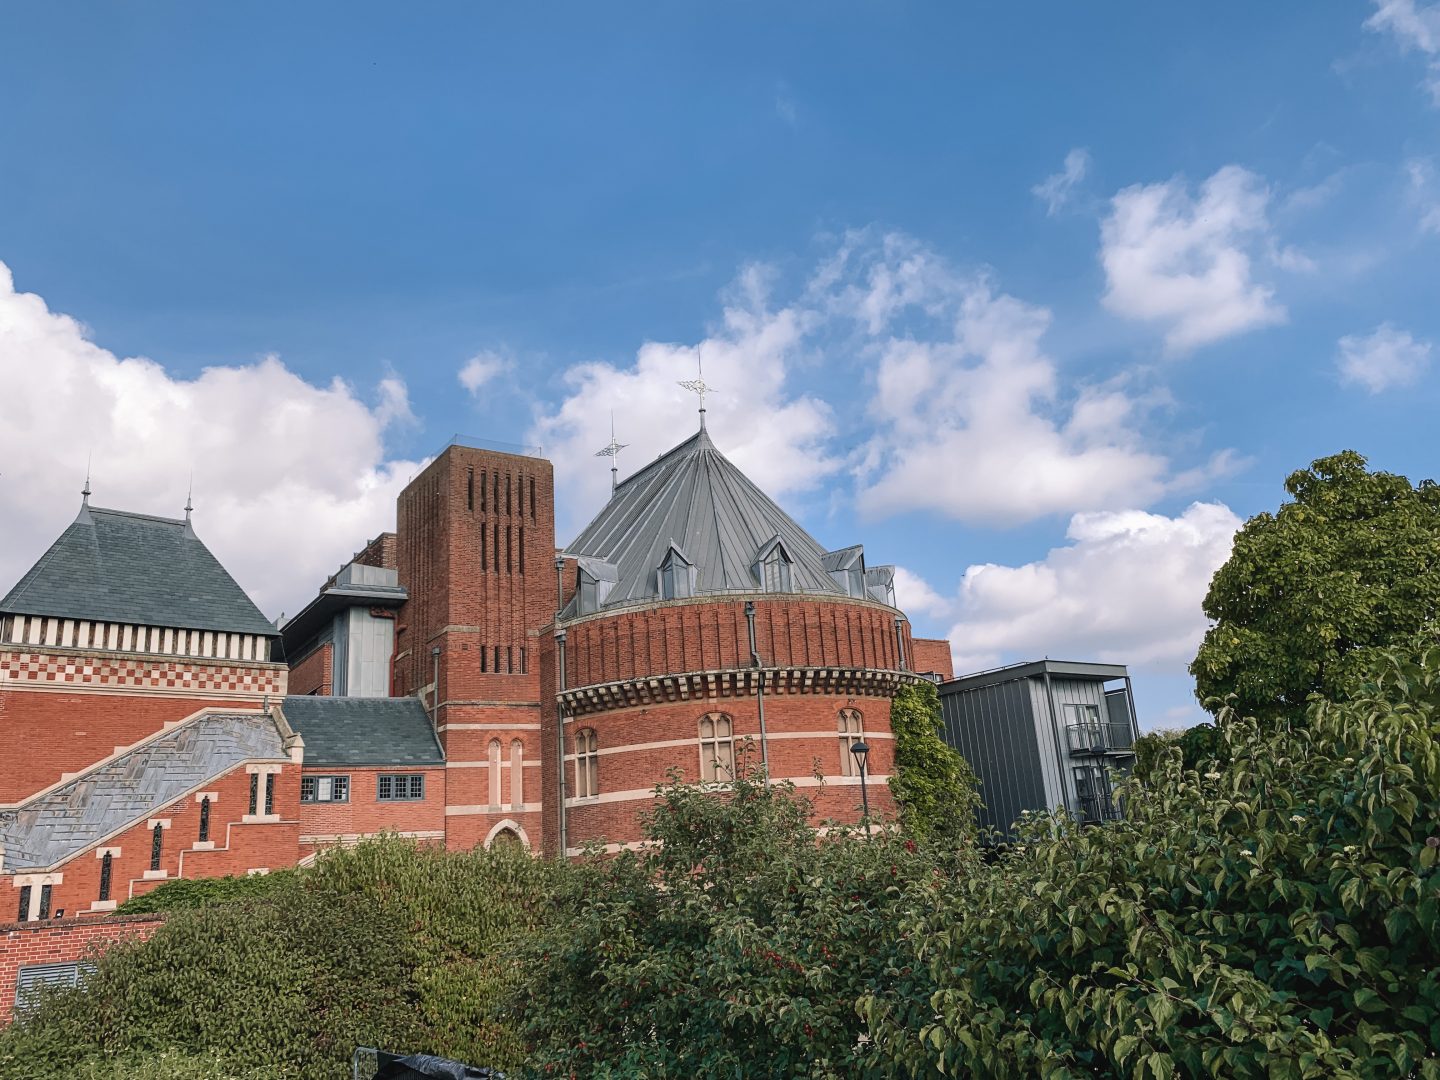 The Swan Theatre and the Royal Shakespeare Theatre